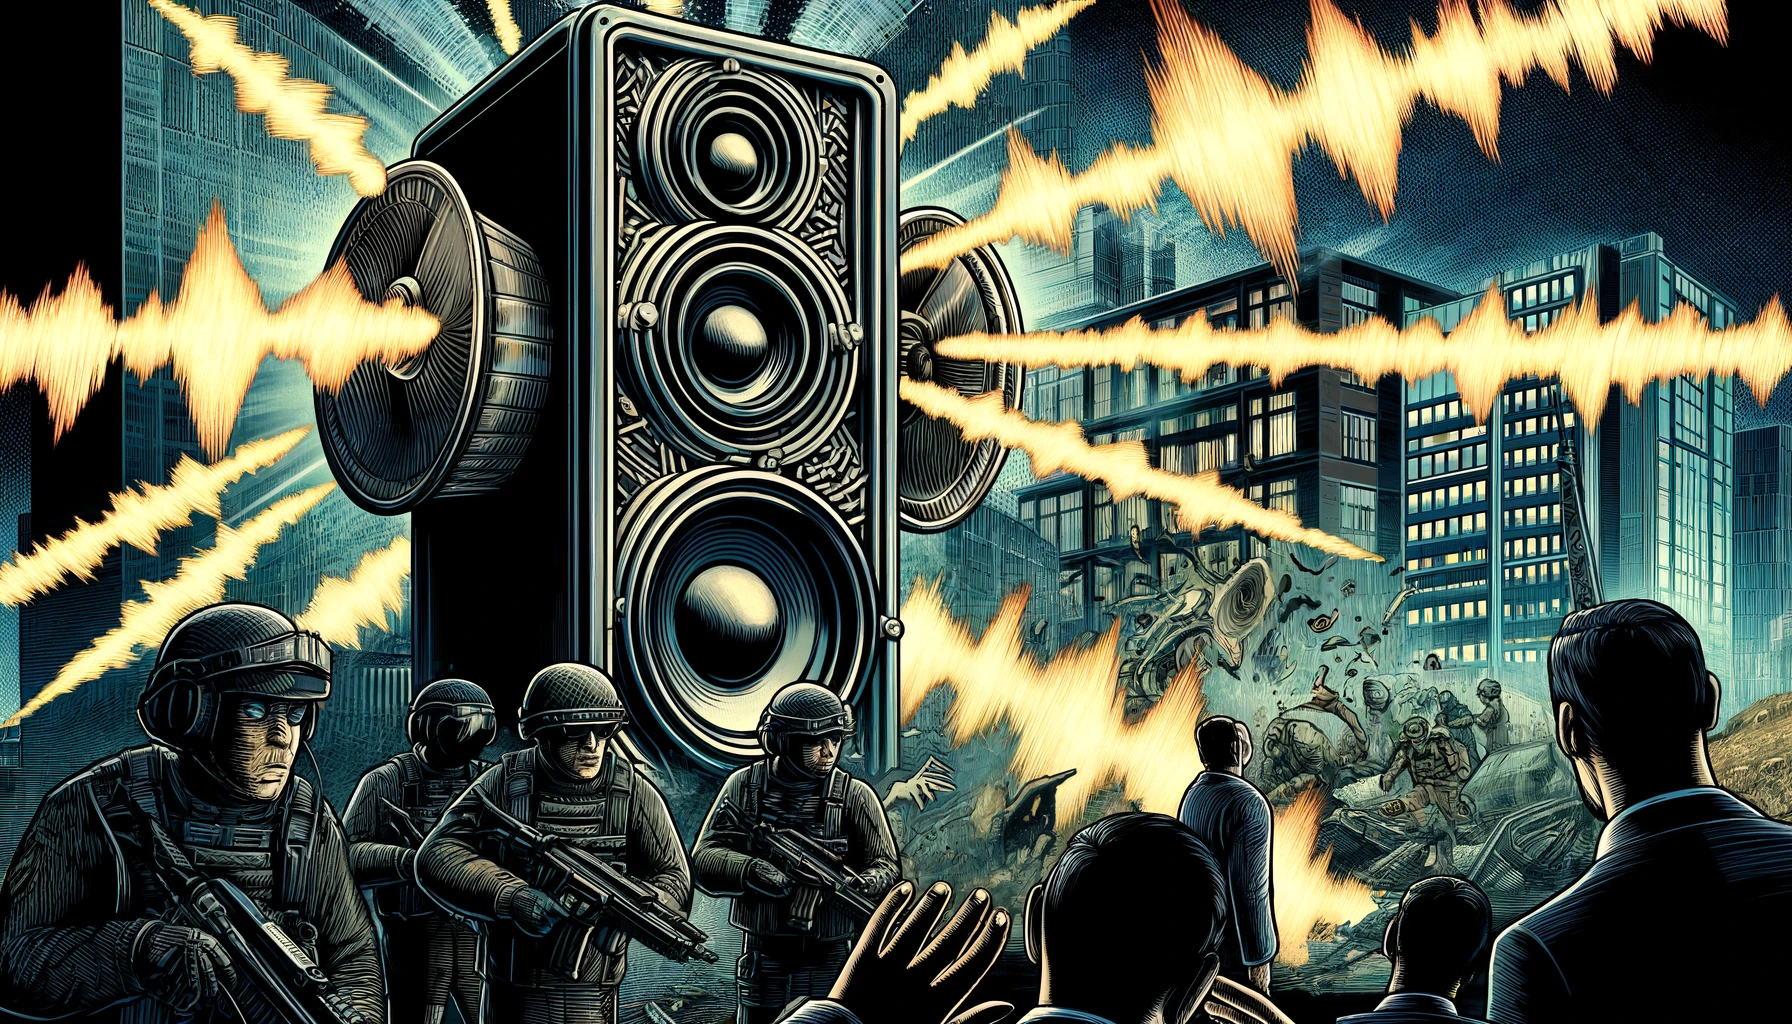 DALL·E 2024 06 10 11.22.02 A comic book style image depicting the weaponization of sound. The scene shows futuristic military technology emitting powerful sound waves as weapons